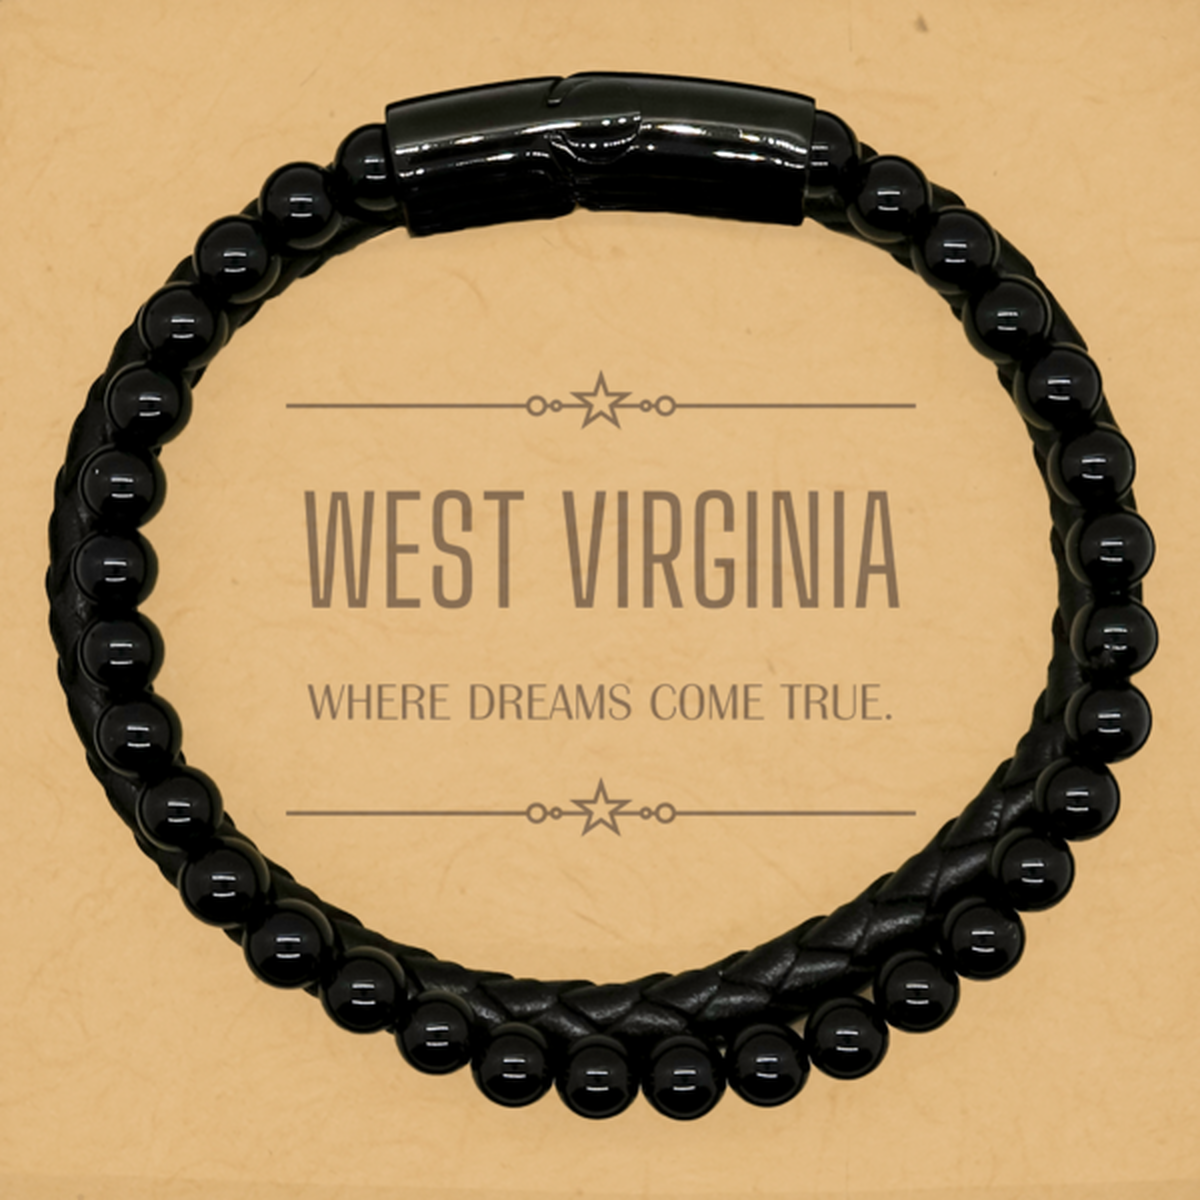 Love West Virginia State Stone Leather Bracelets, West Virginia Where dreams come true, Birthday Inspirational Gifts For West Virginia Men, Women, Friends